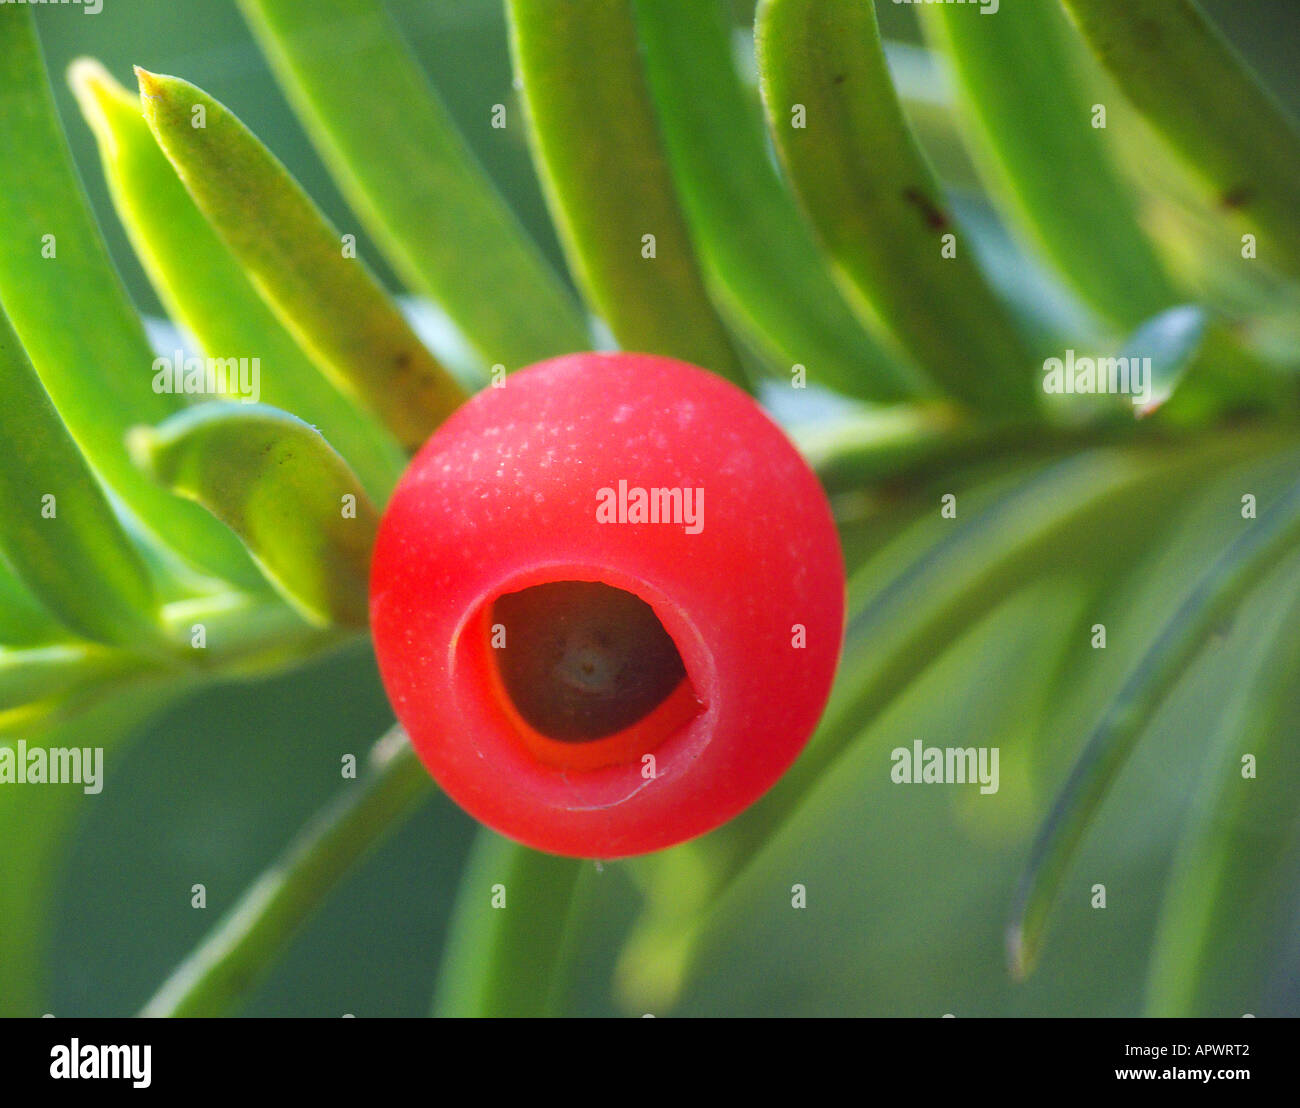 Yew tree red berry close up Taxus baccata Stock Photo